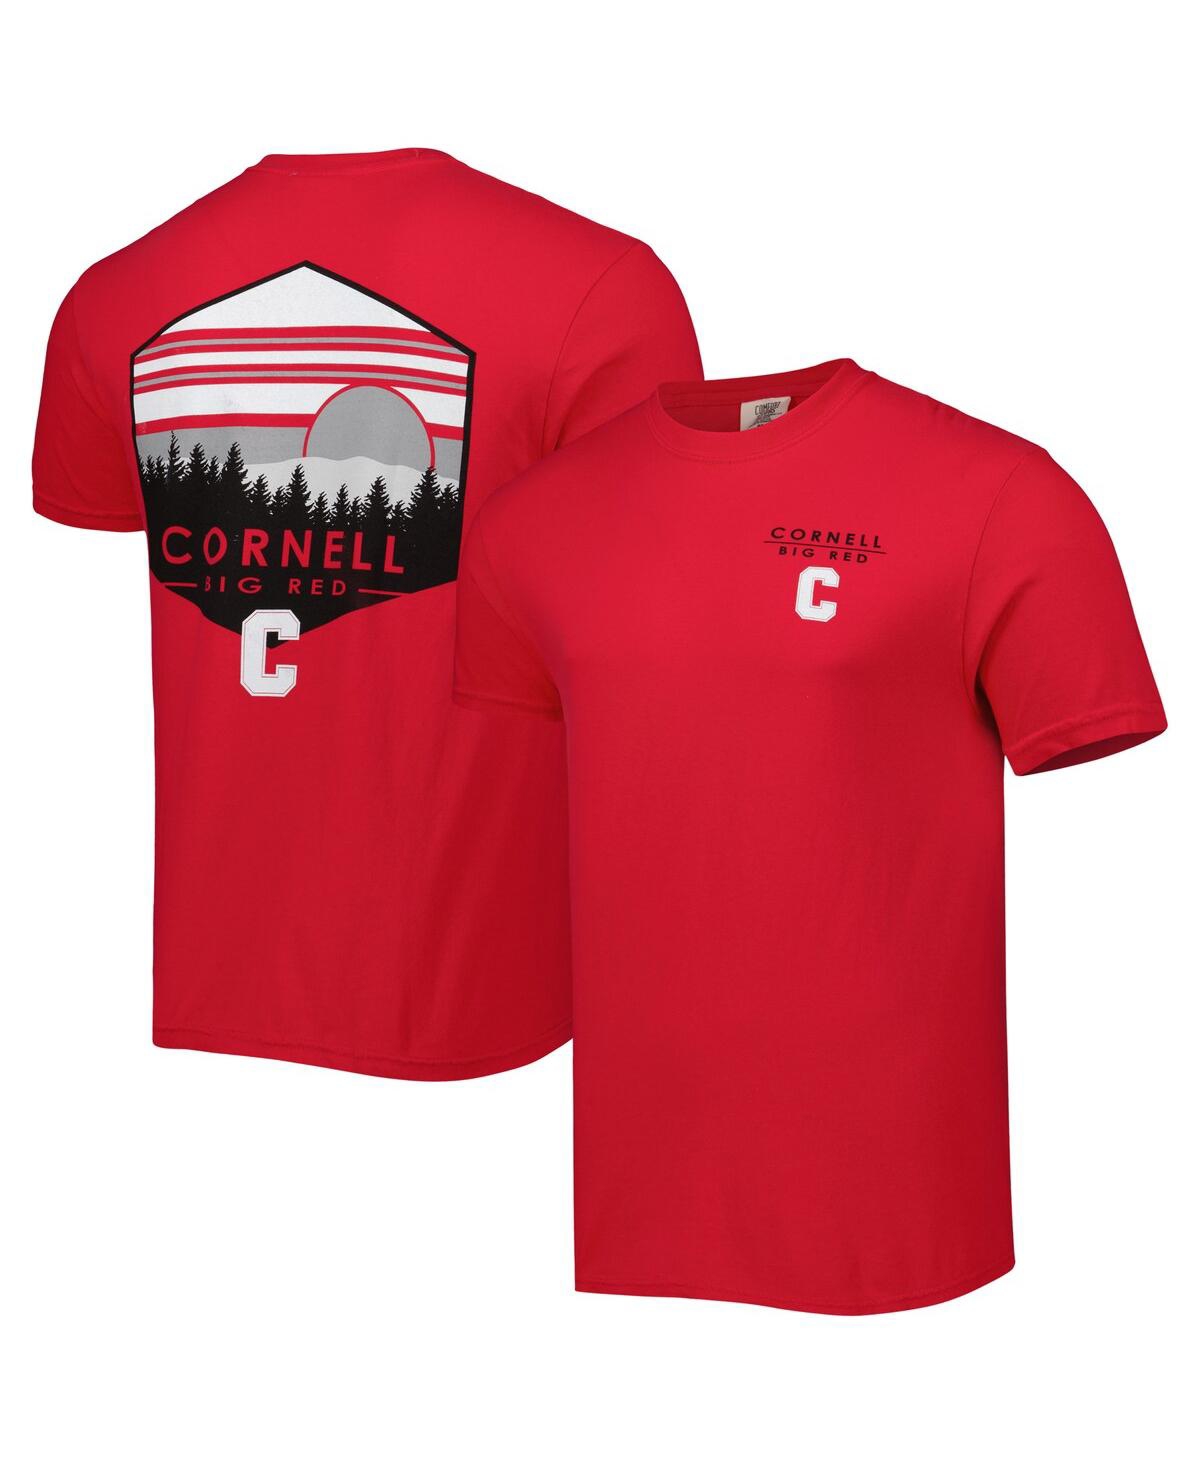 IMAGE ONE MEN'S RED CORNELL BIG RED LANDSCAPE SHIELD T-SHIRT